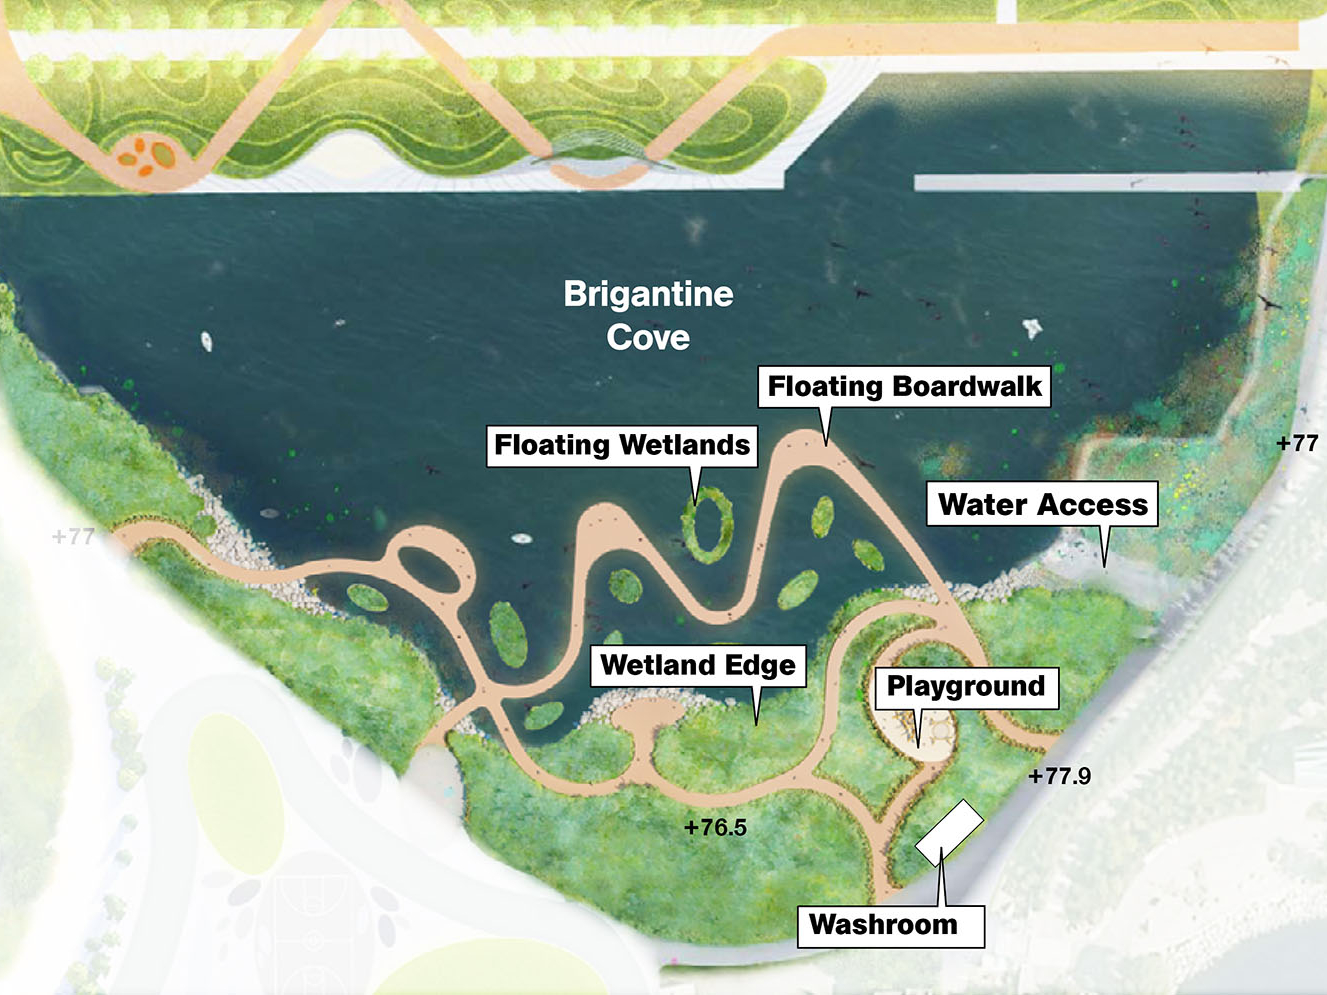 Brigantine cove showing floating boardwalks, floating wetlands, a wetland edge, water access to the east, and a small playground. 